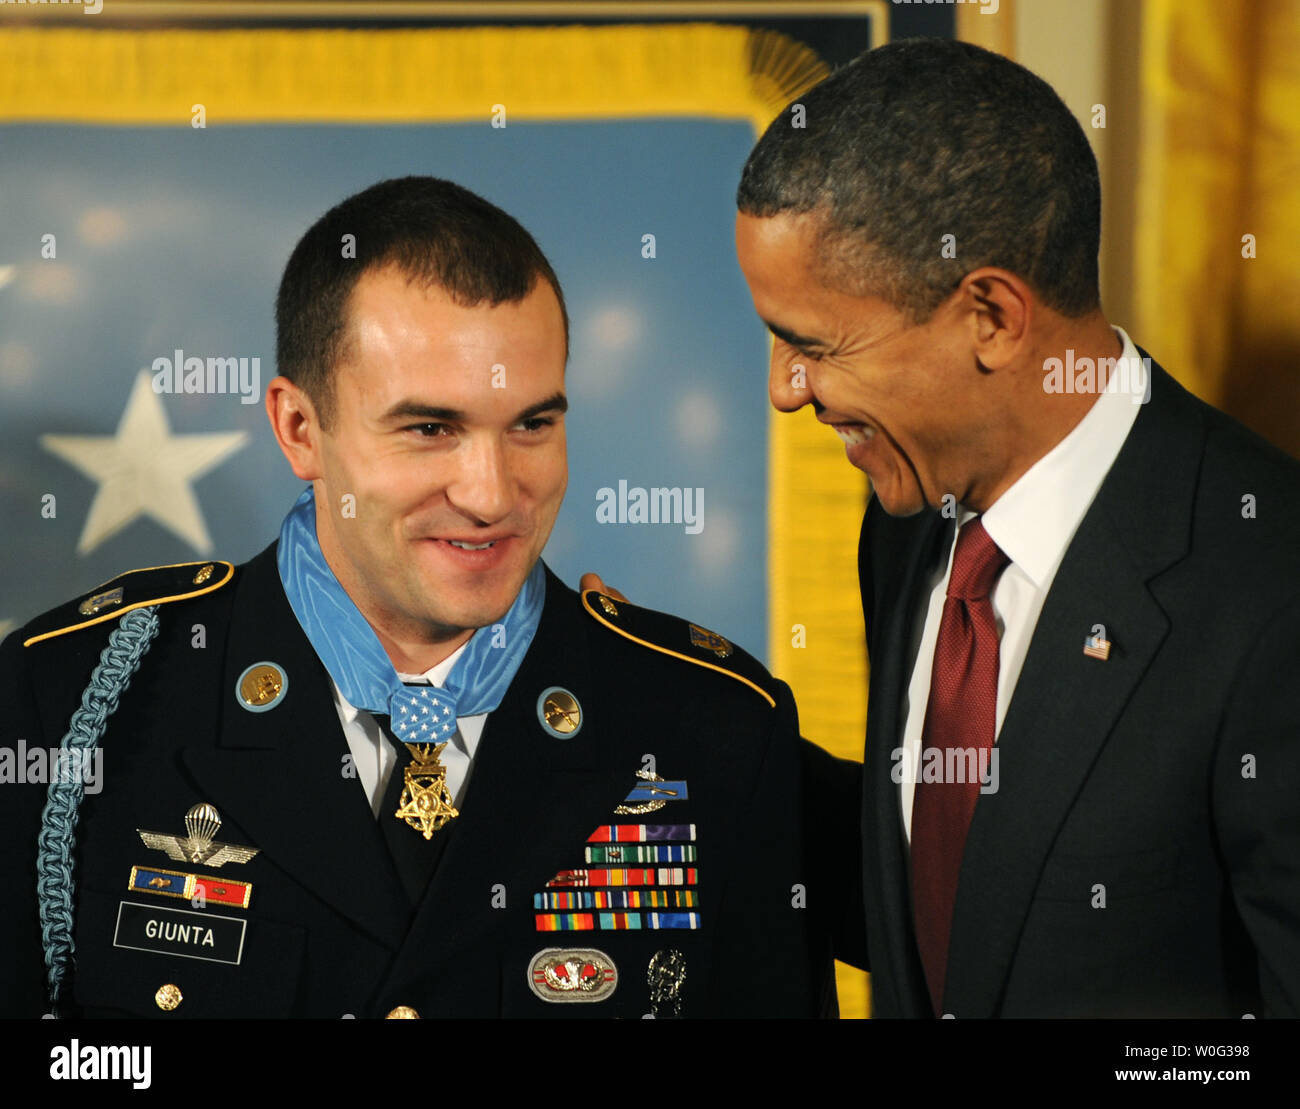 Obama awards Medal of Honor, highest US military decoration, to Afghanistan  hero